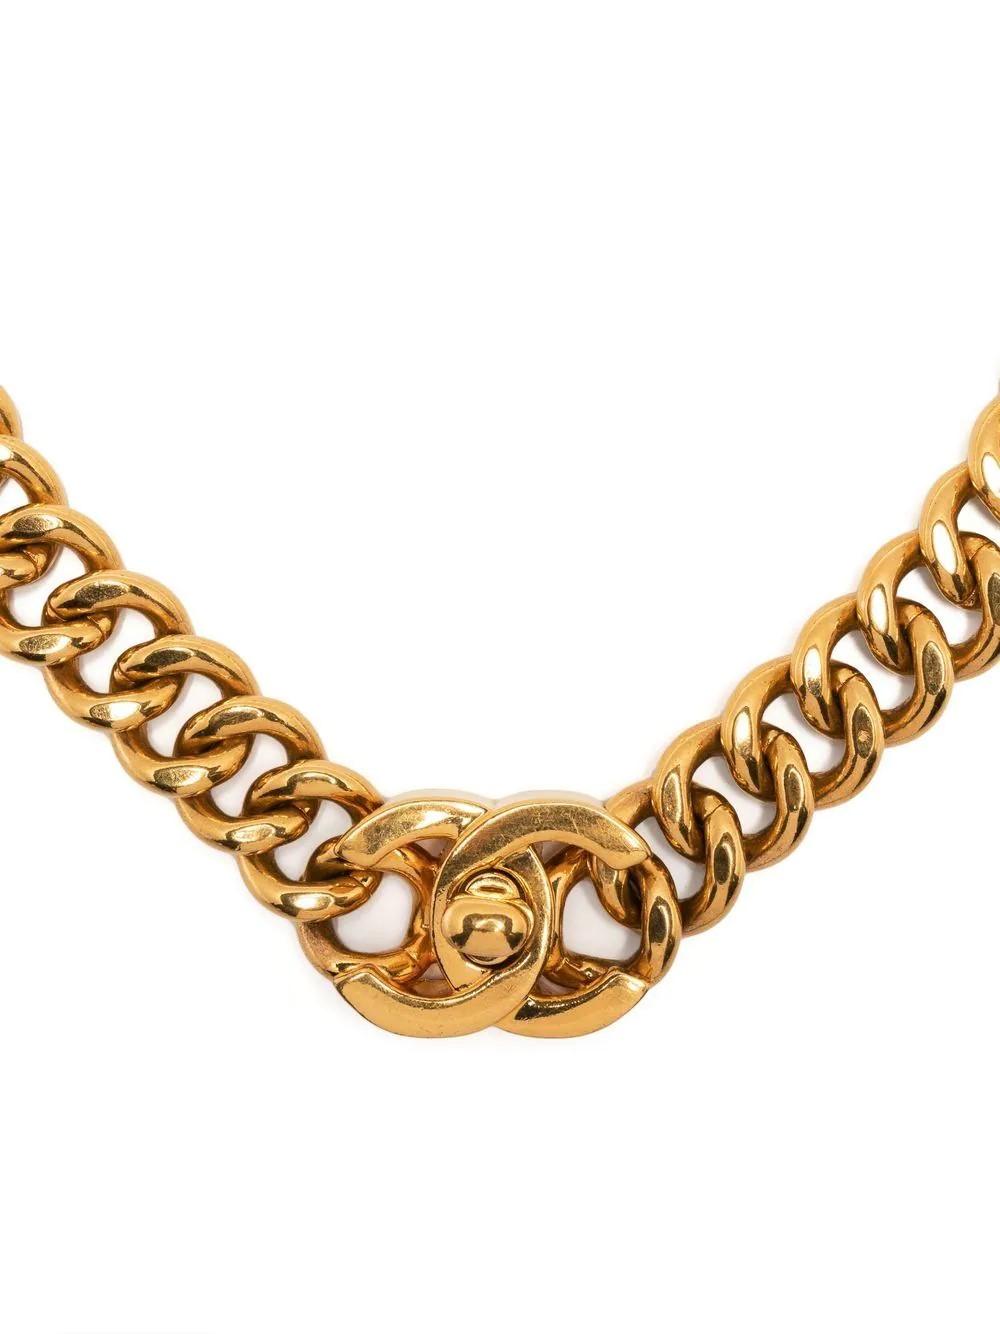 This is a necklace that can't go wrong. Chunky, gold and has the iconic double CC turn-lock, you can't find better. The CC turn-lock is a staple Chanel feature seen in many of the classic Chanel handbag styles, here we see it transformed into a